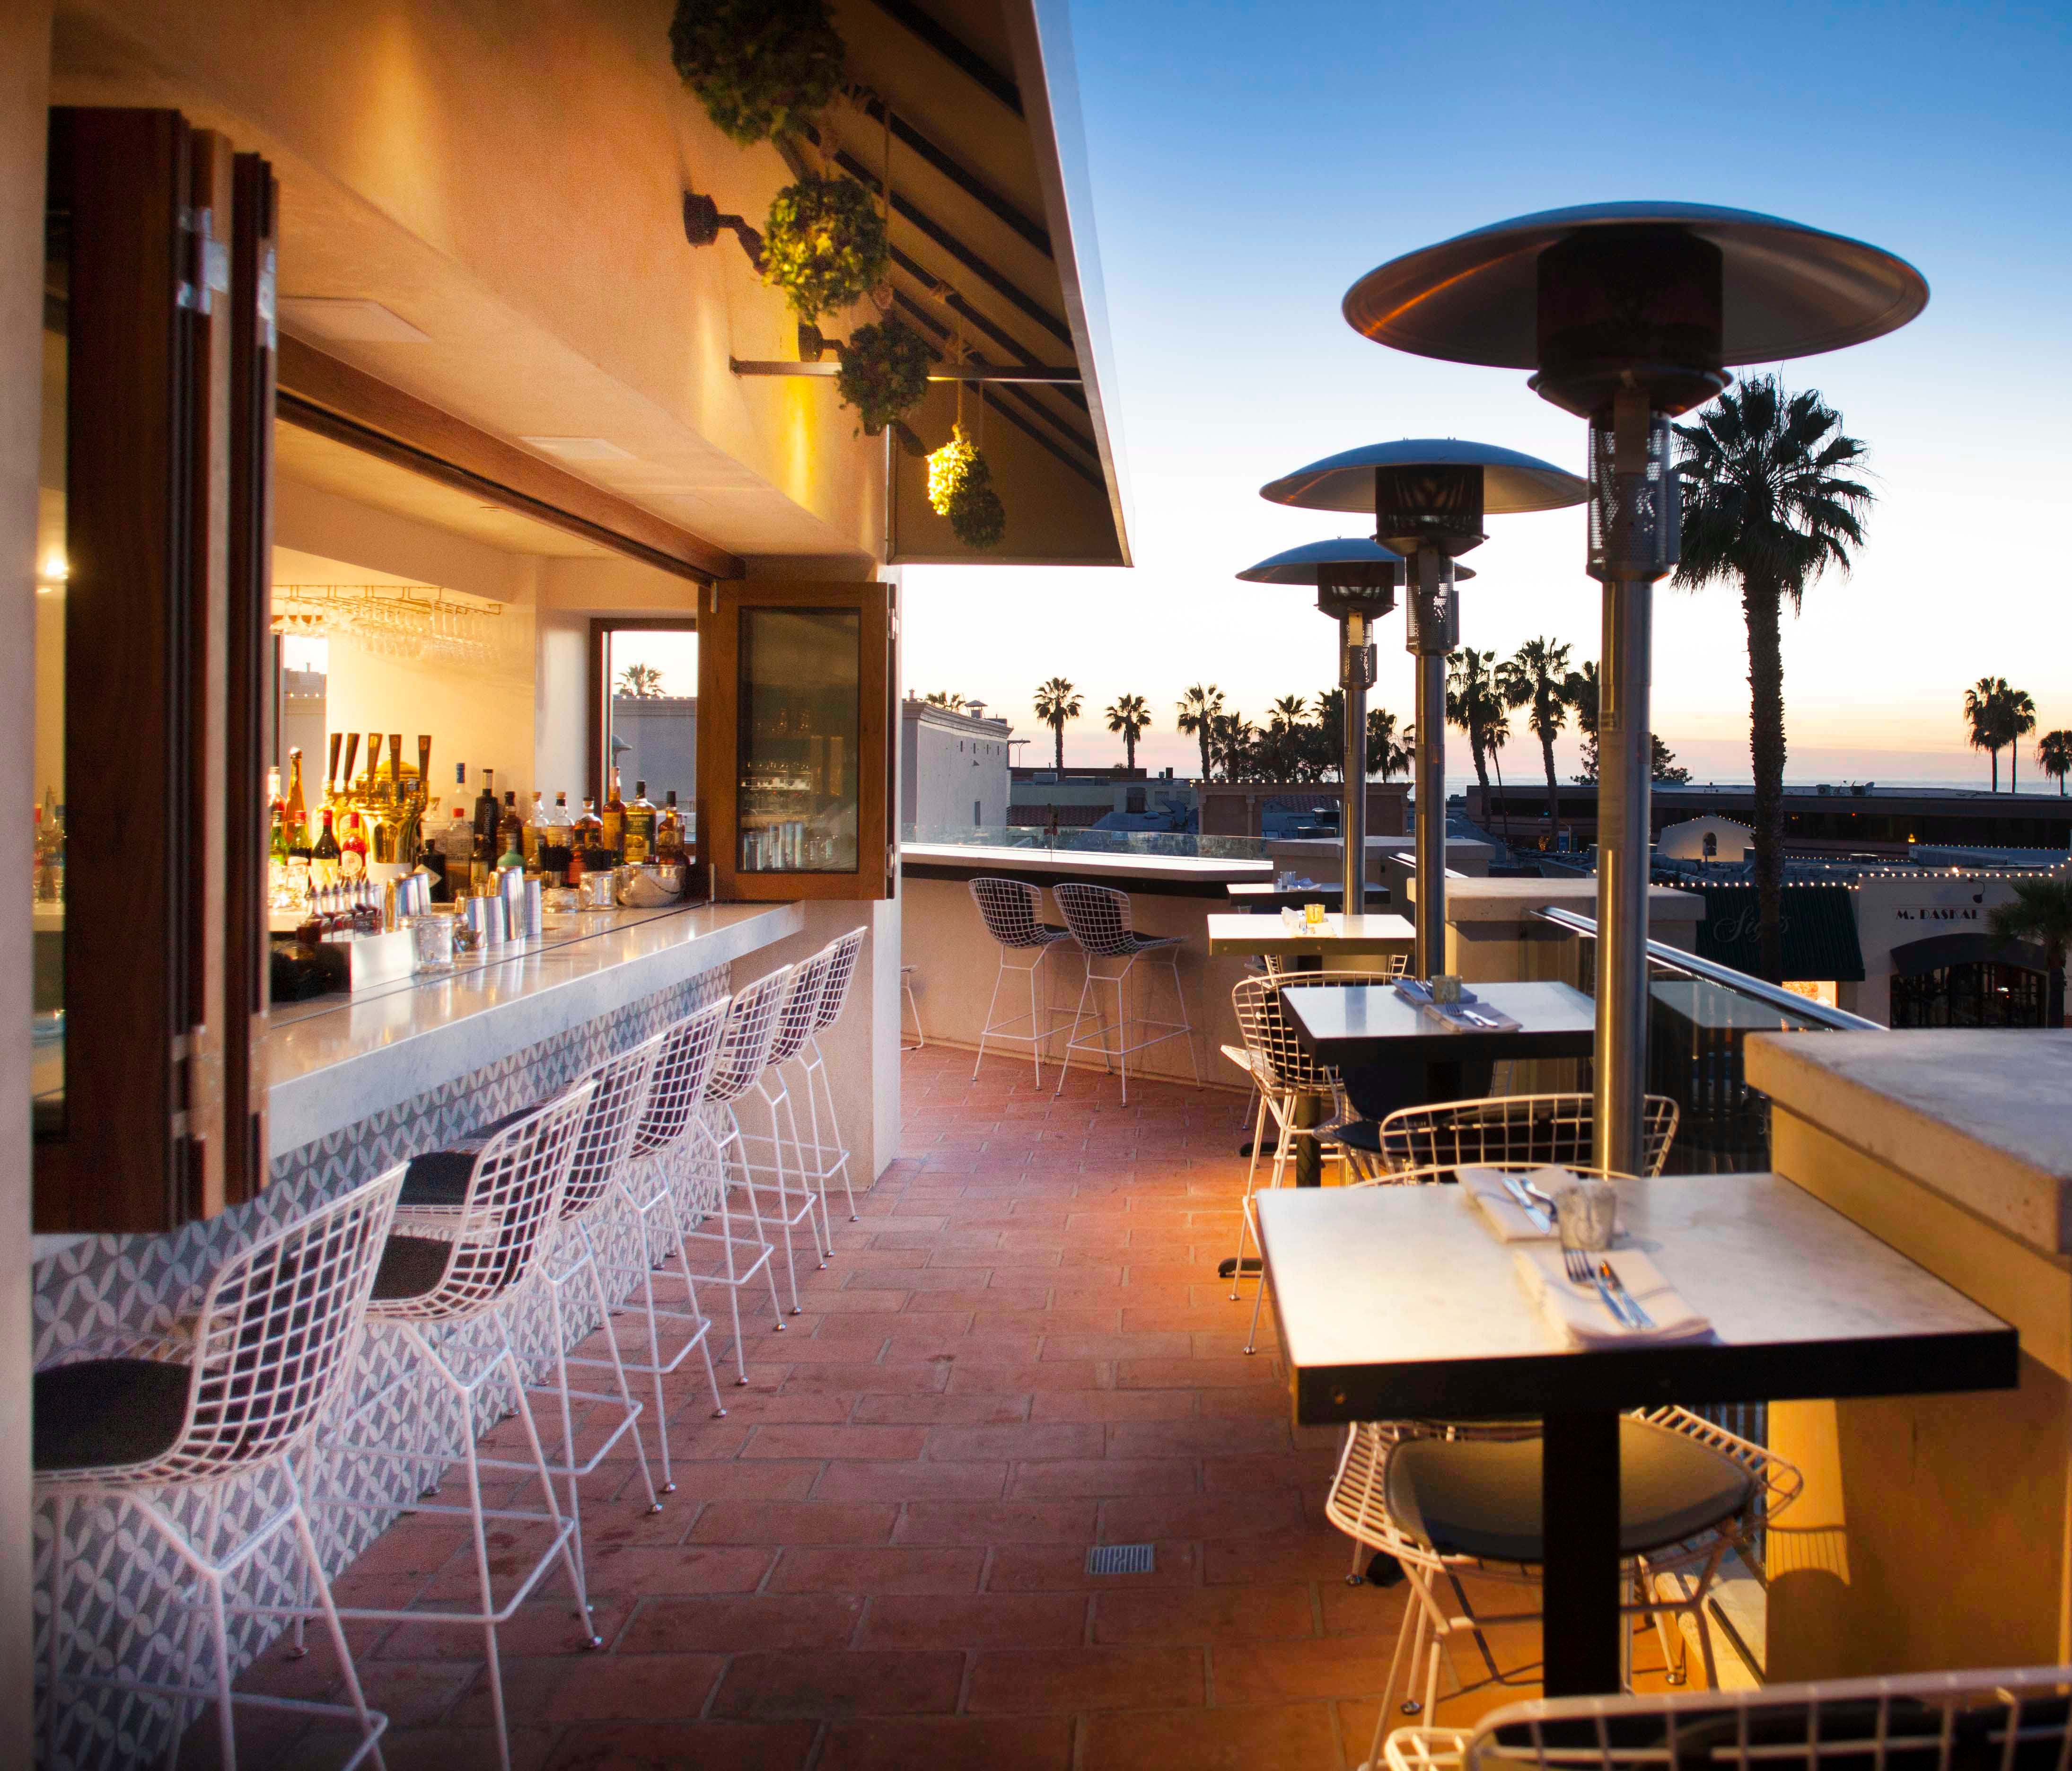 Catania offers Italian lunch and dinner overlooking the beach in San Diego.